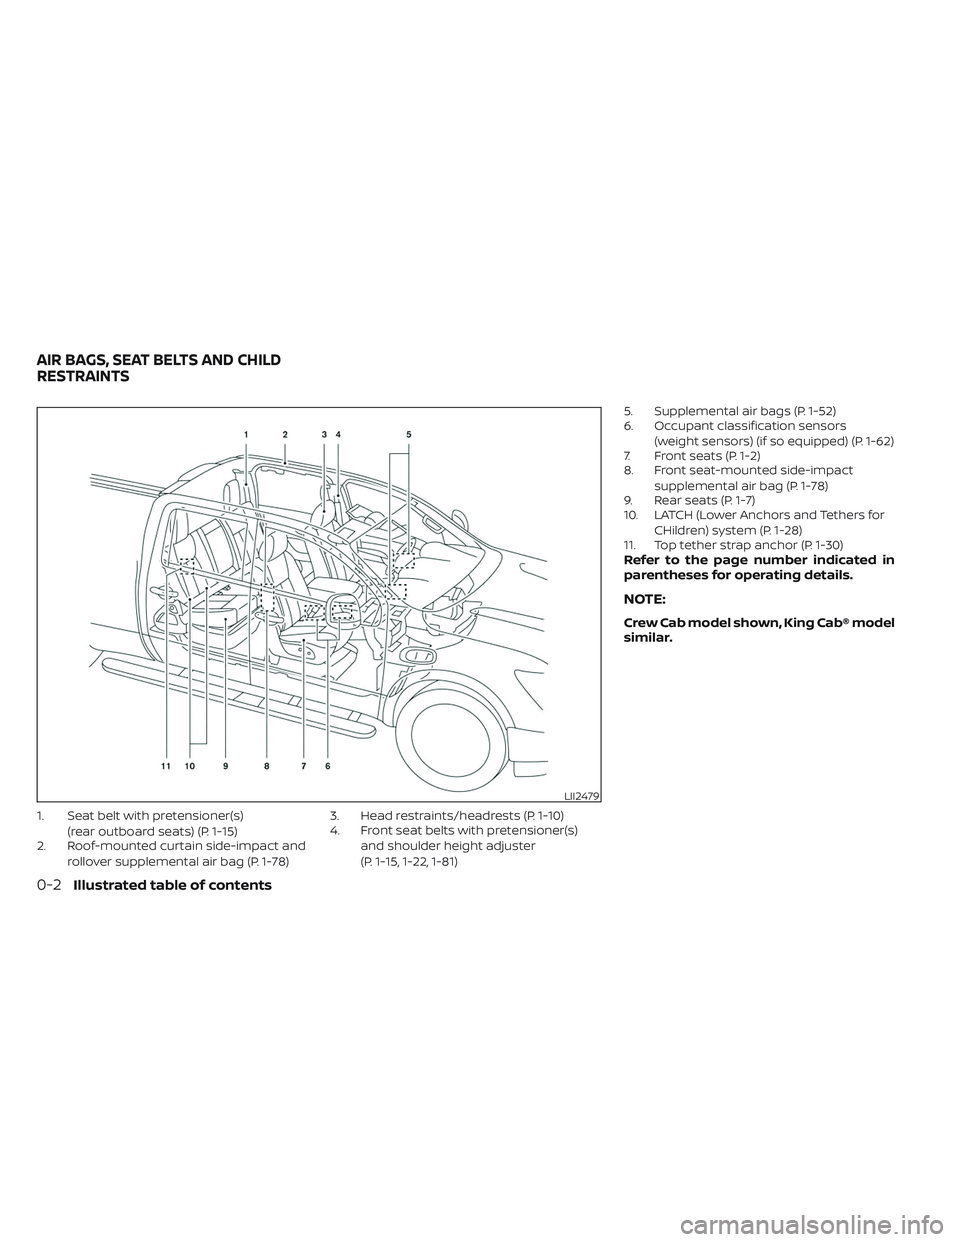 NISSAN TITAN 2023  Owners Manual 1. Seat belt with pretensioner(s)(rear outboard seats) (P. 1-15)
2. Roof-mounted curtain side-impact and
rollover supplemental air bag (P. 1-78) 3. Head restraints/headrests (P. 1-10)
4. Front seat be